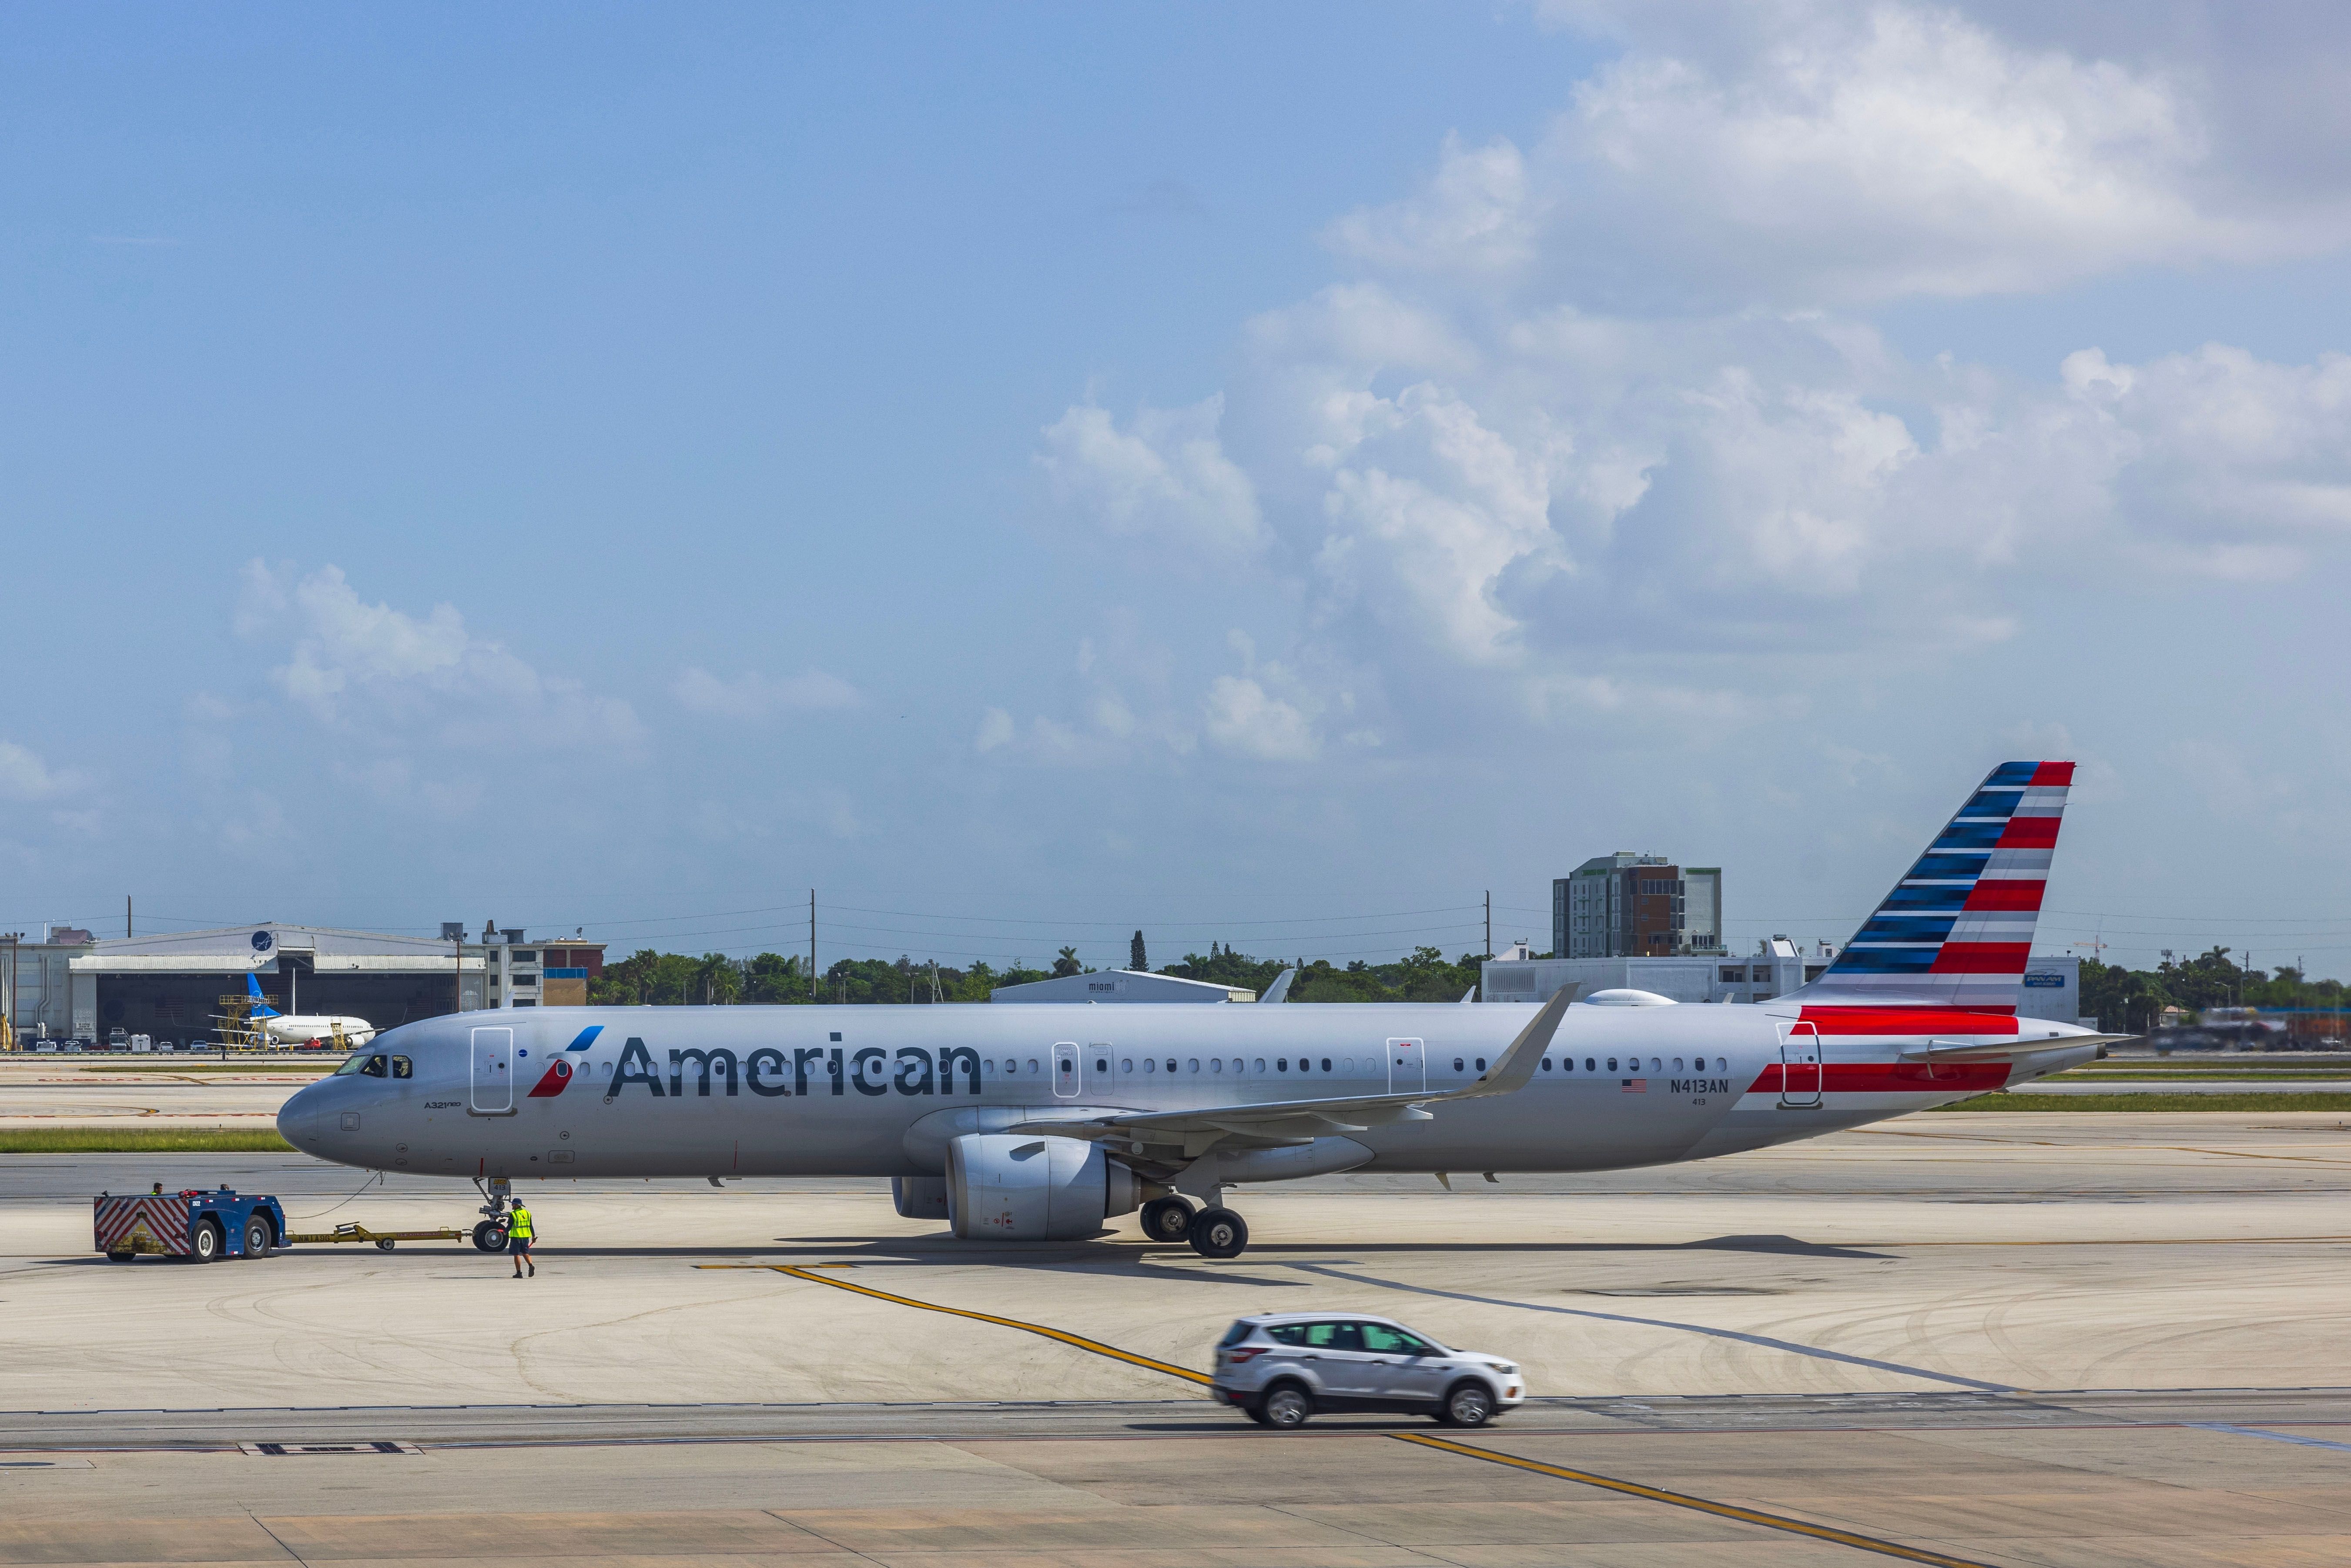 An American Airlines Airbus A321neo on an airport apron.